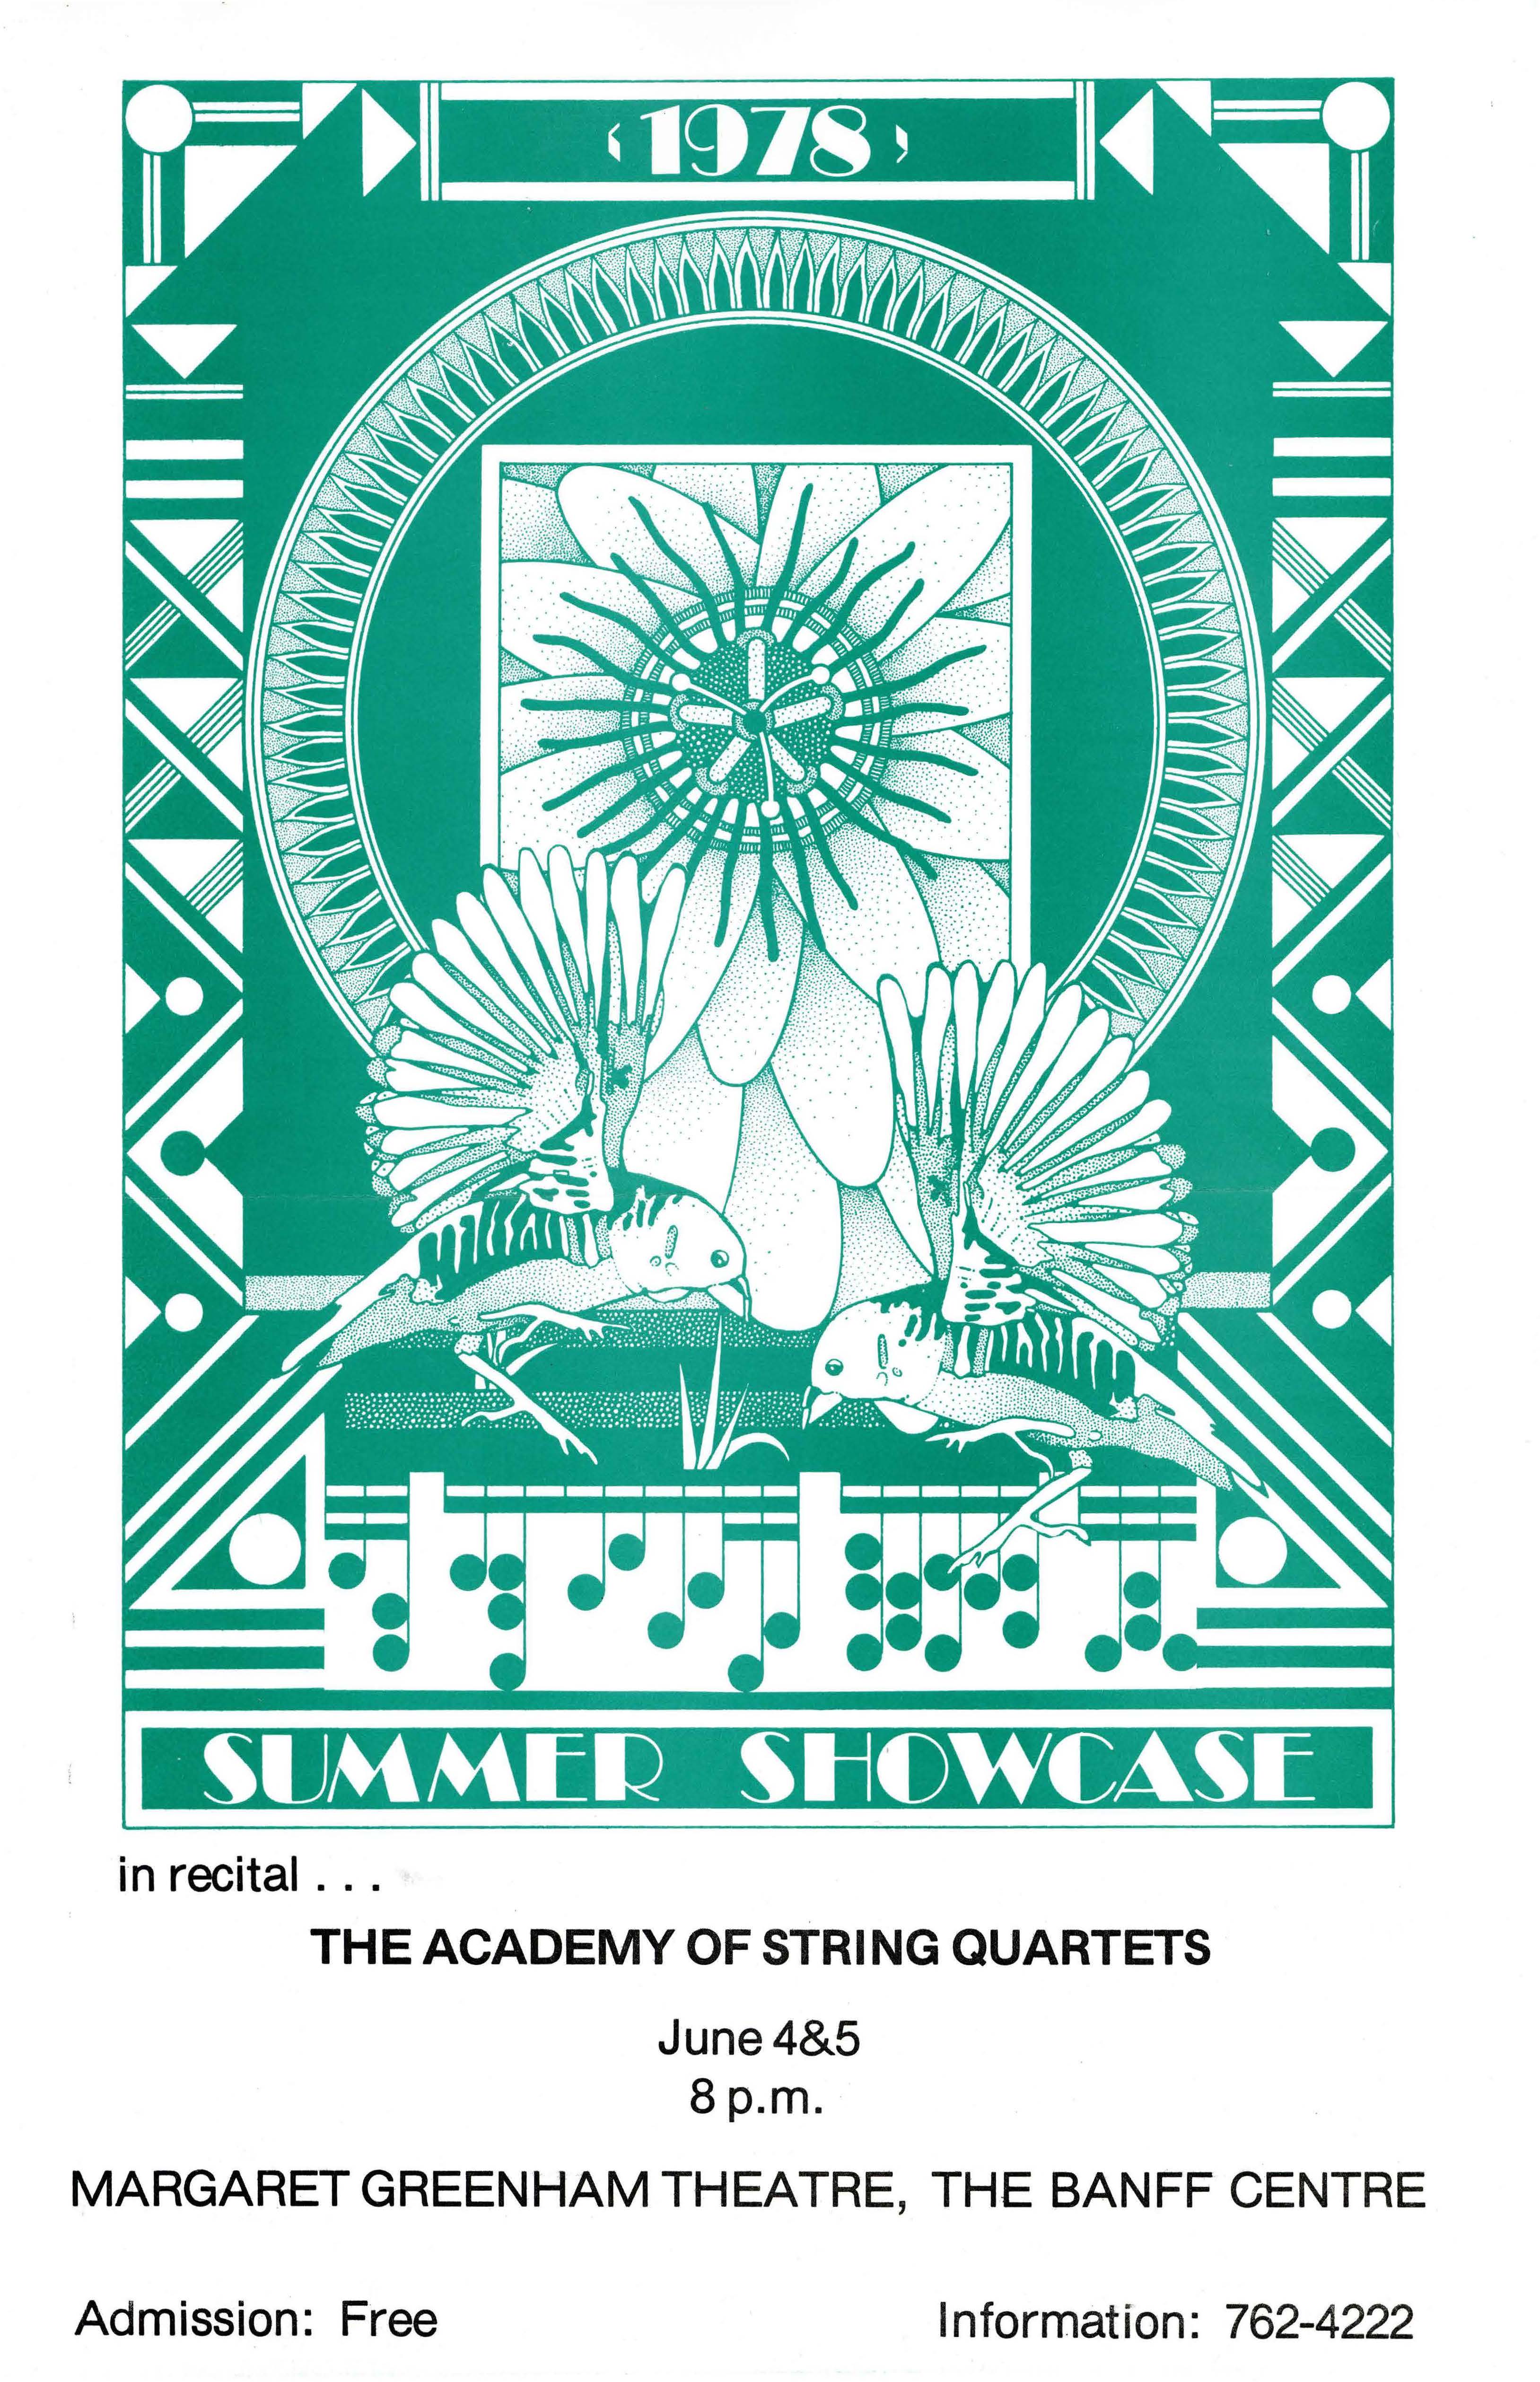 A poster for The Academy of String Quartets Summer Showcase featuring geometric shapes and birds